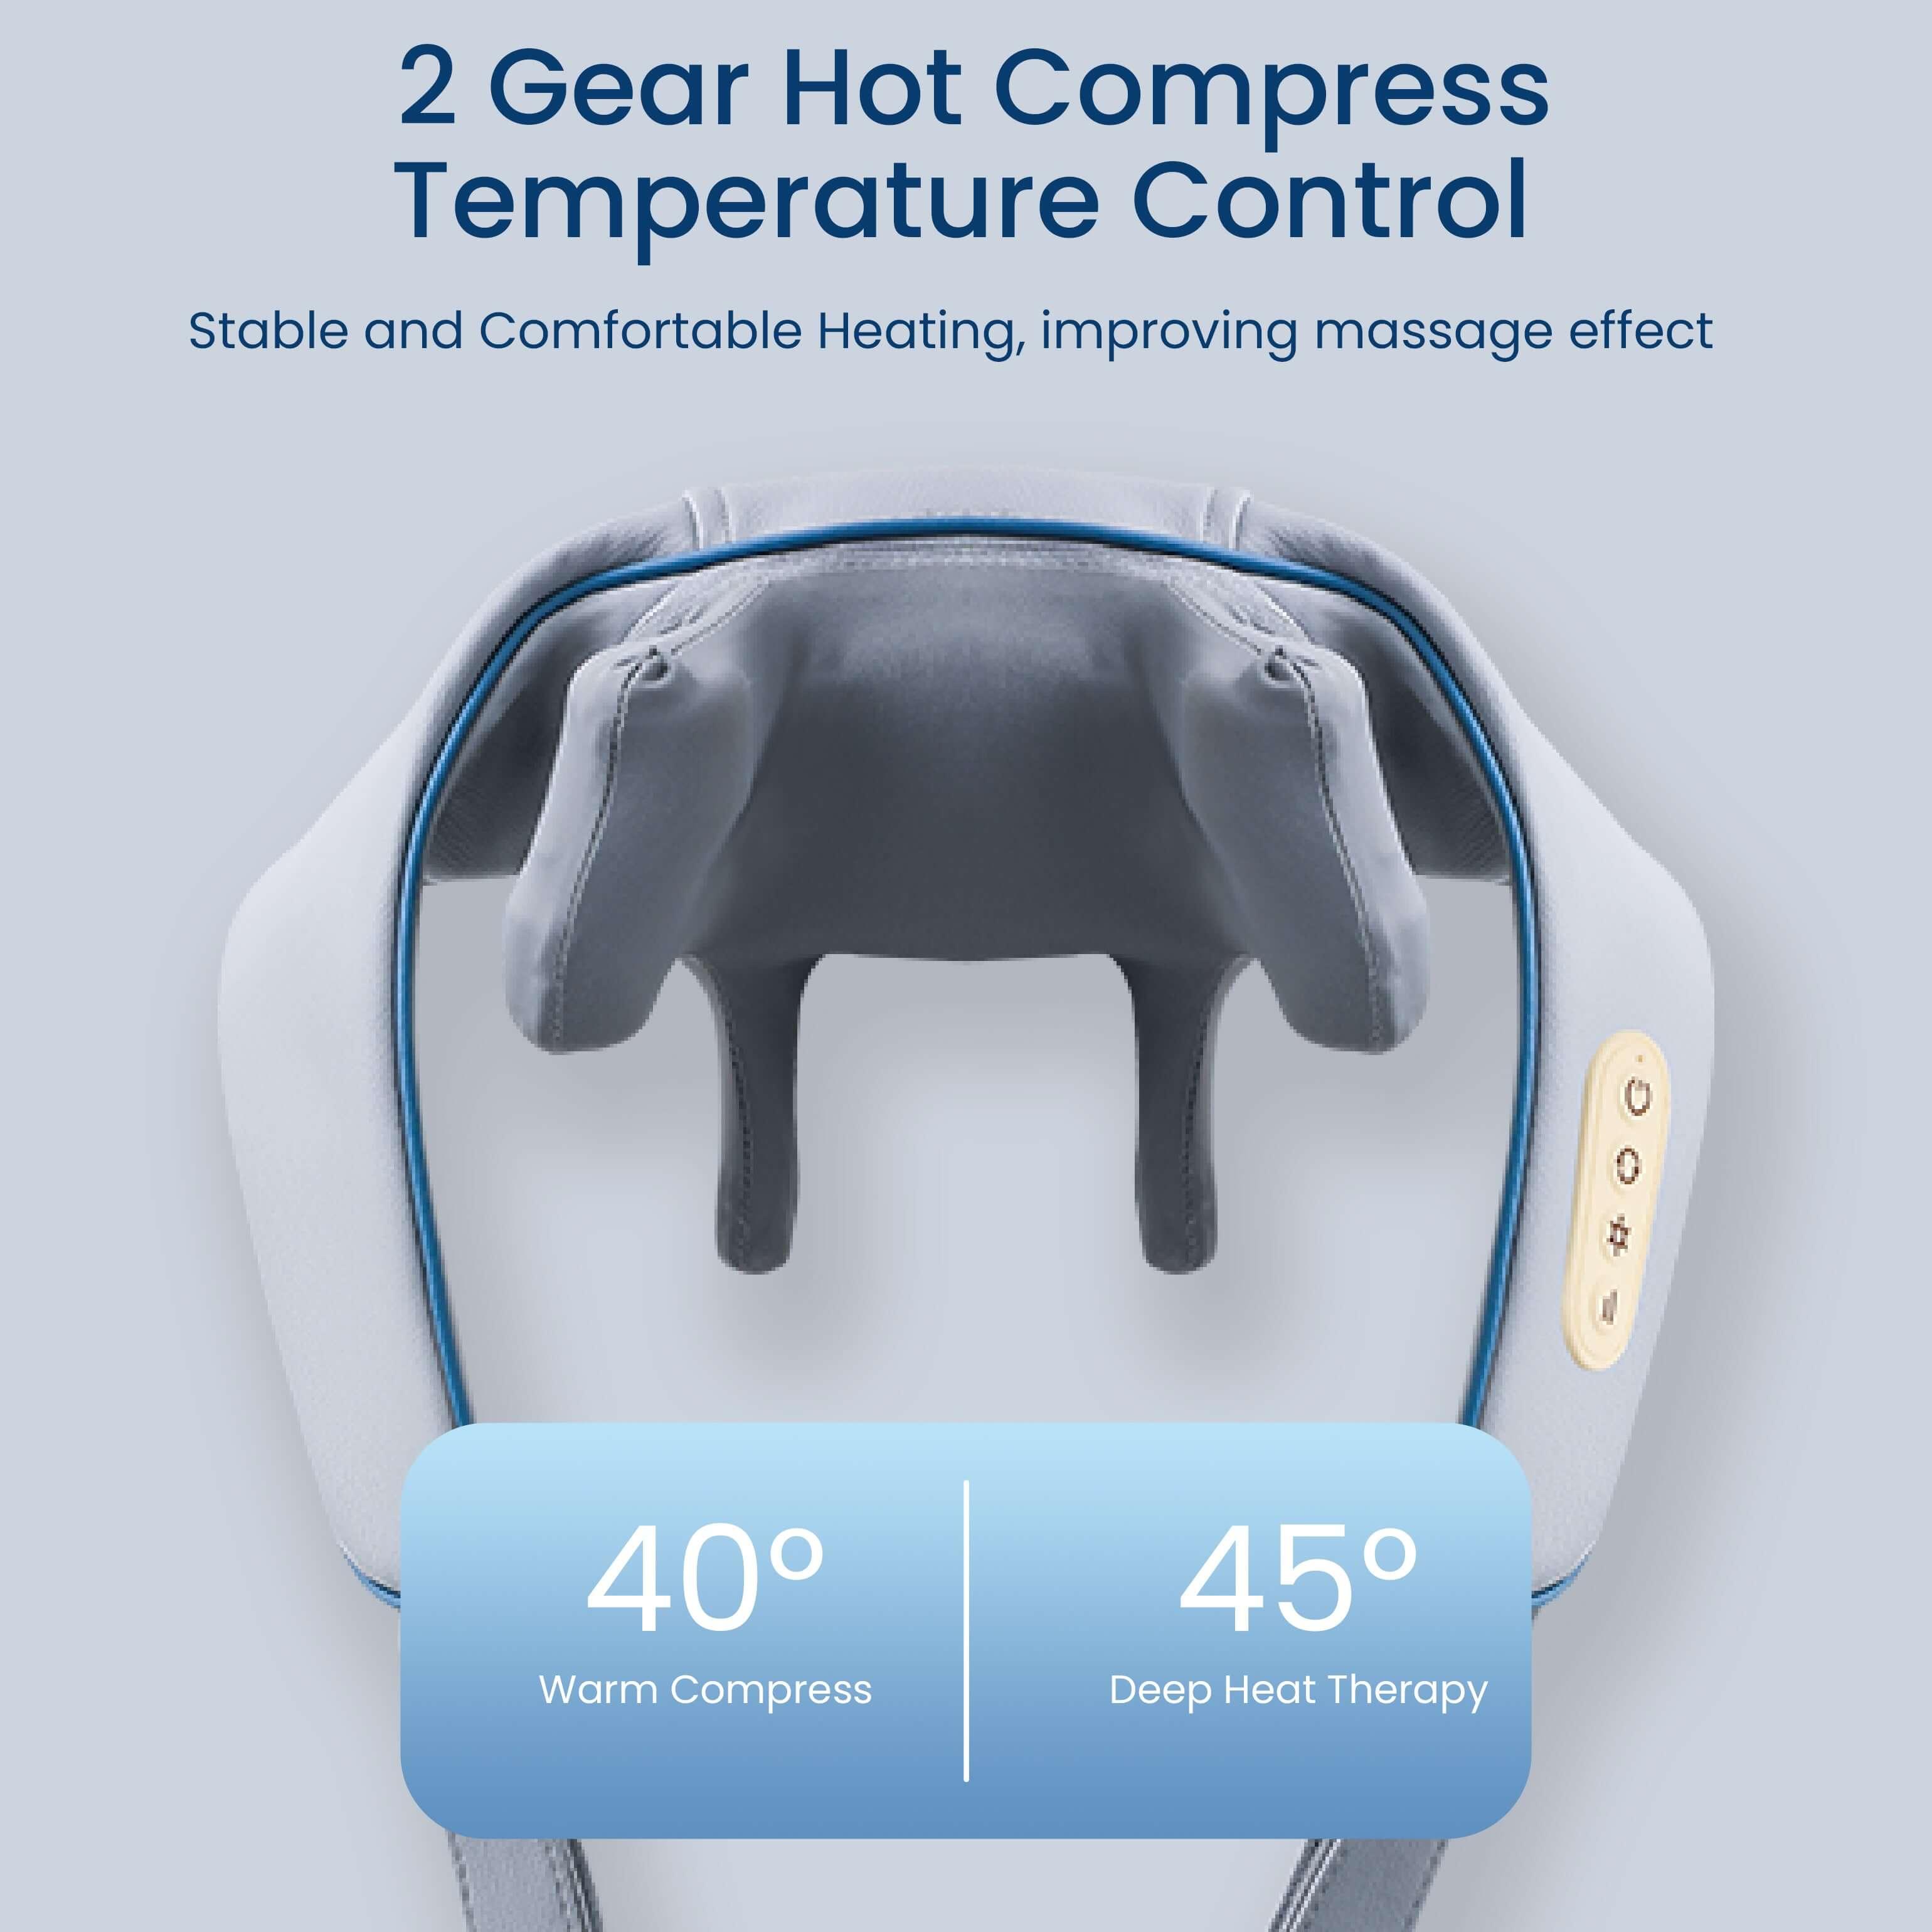 Trapezius massager with 2 gear hot compress temperature control, featuring 40° warm compress and 45° deep heat therapy for improved massage effect